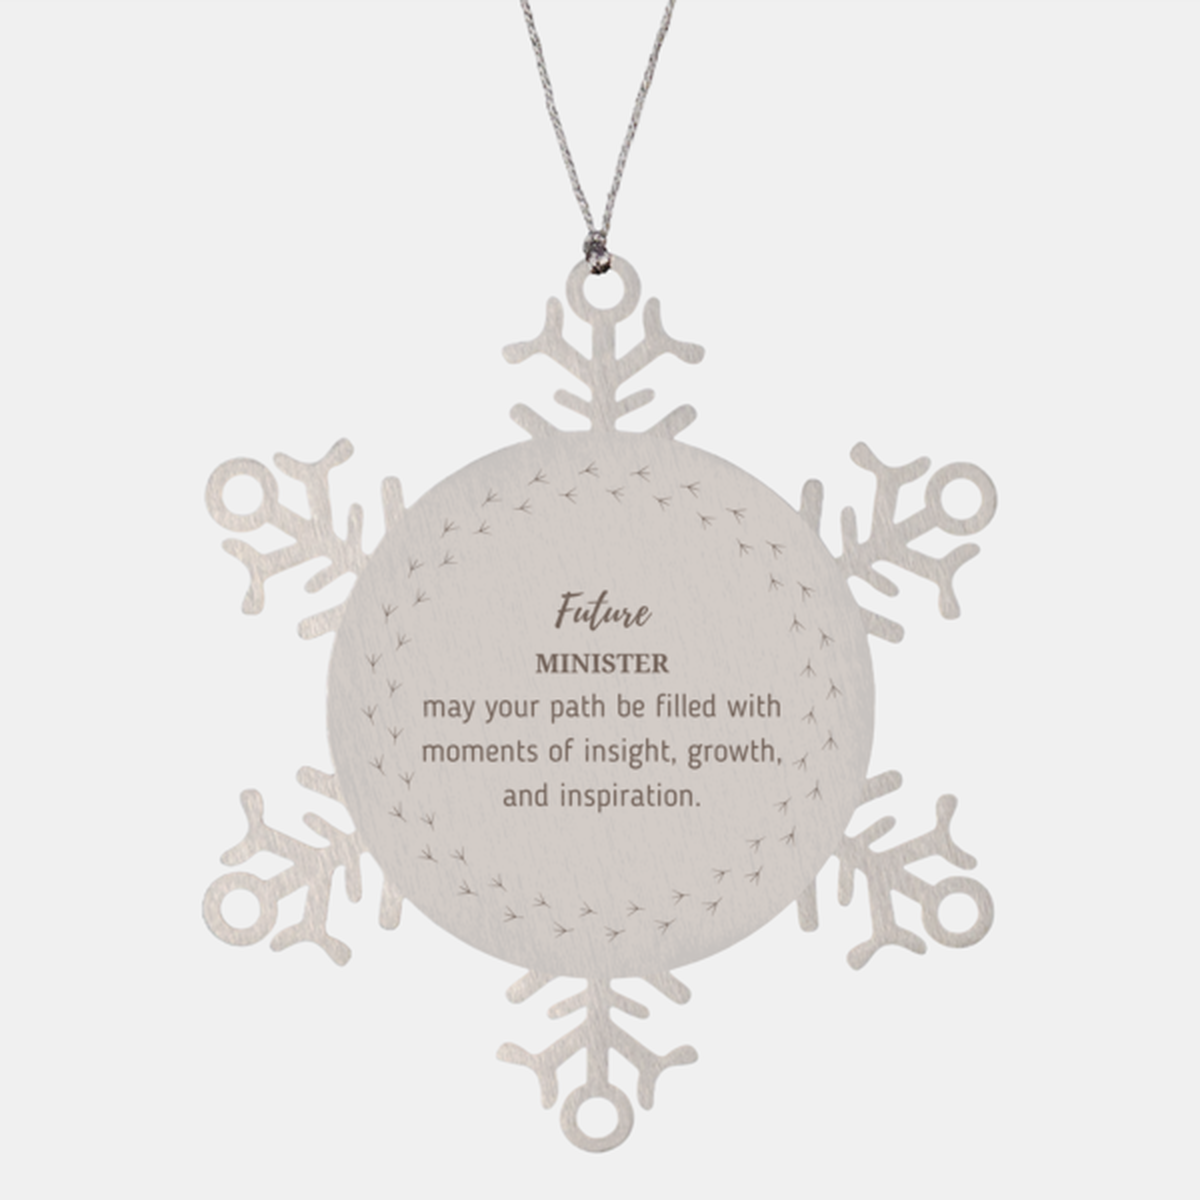 Future Minister Gifts, May your path be filled with moments of insight, Graduation Gifts for New Minister, Christmas Unique Snowflake Ornament For Men, Women, Friends